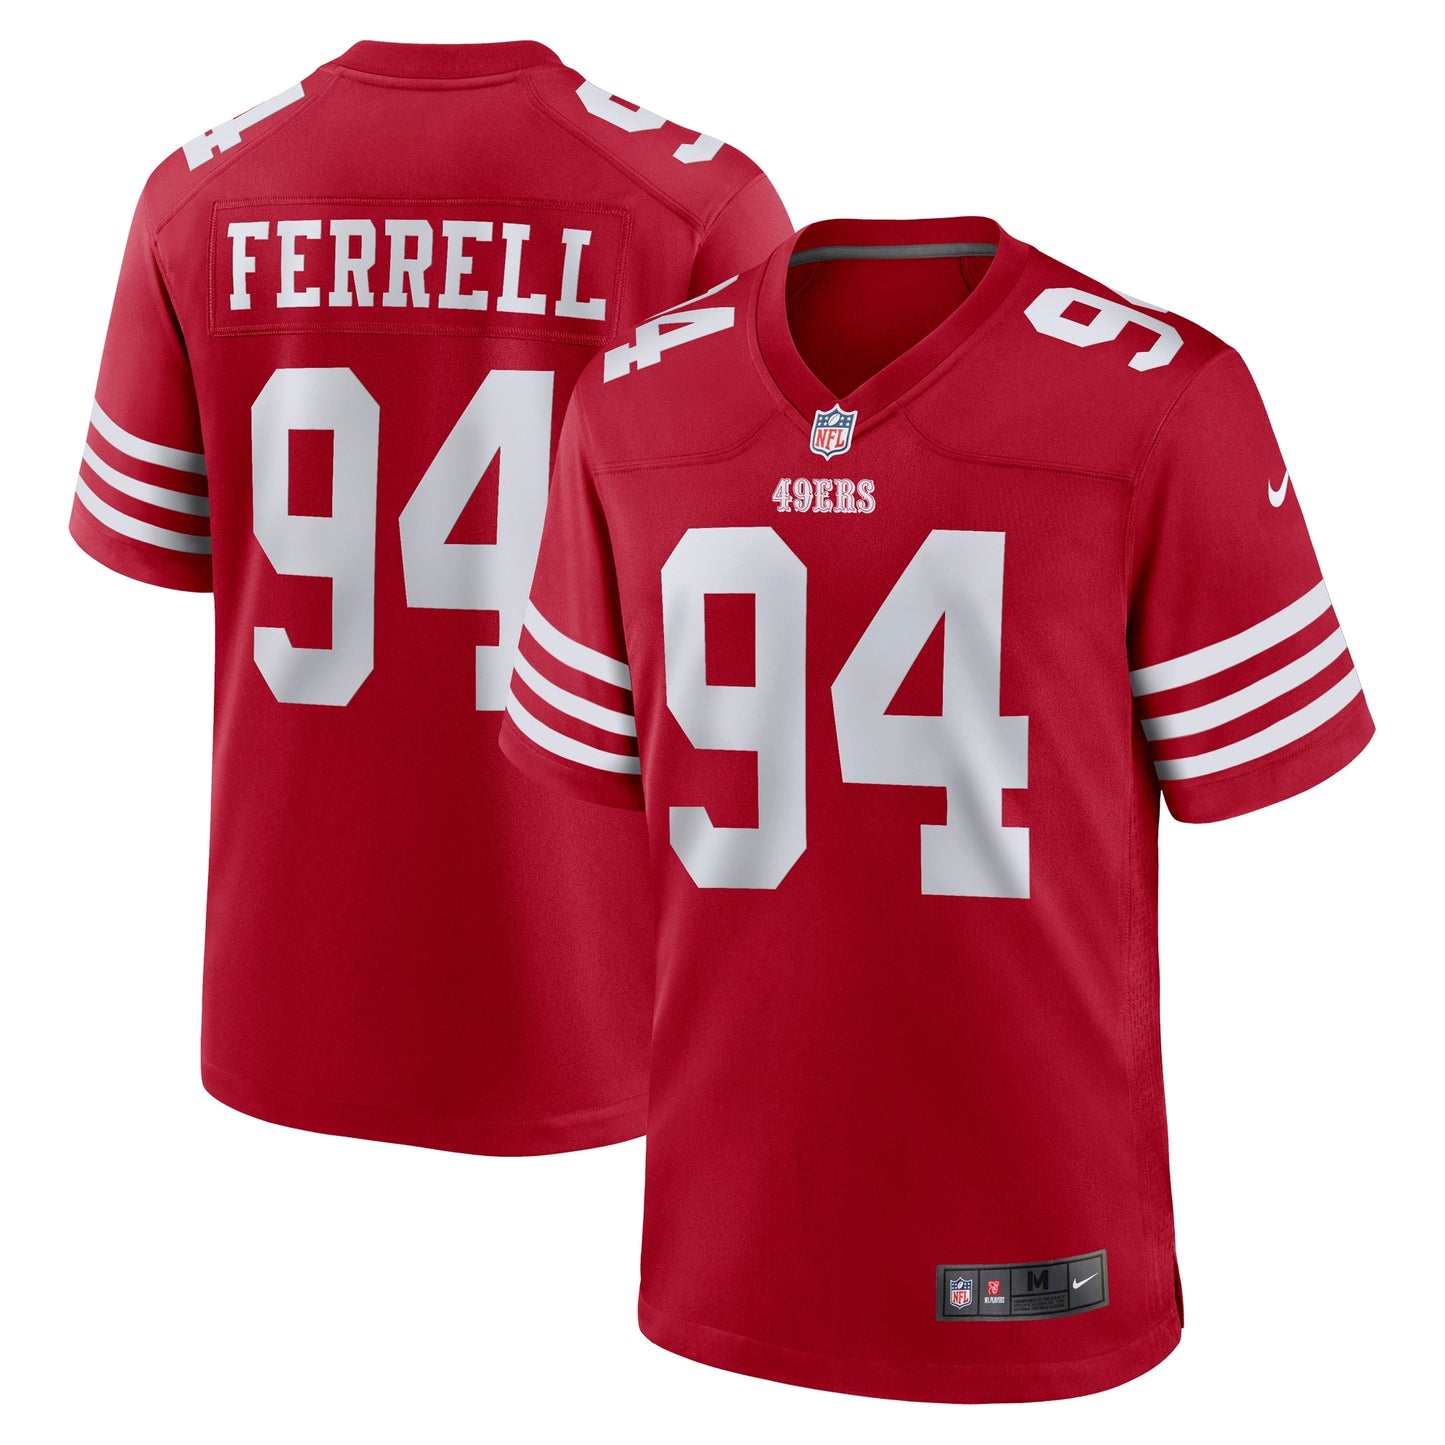 Clelin Ferrell San Francisco 49ers Nike Game Player Jersey - Scarlet